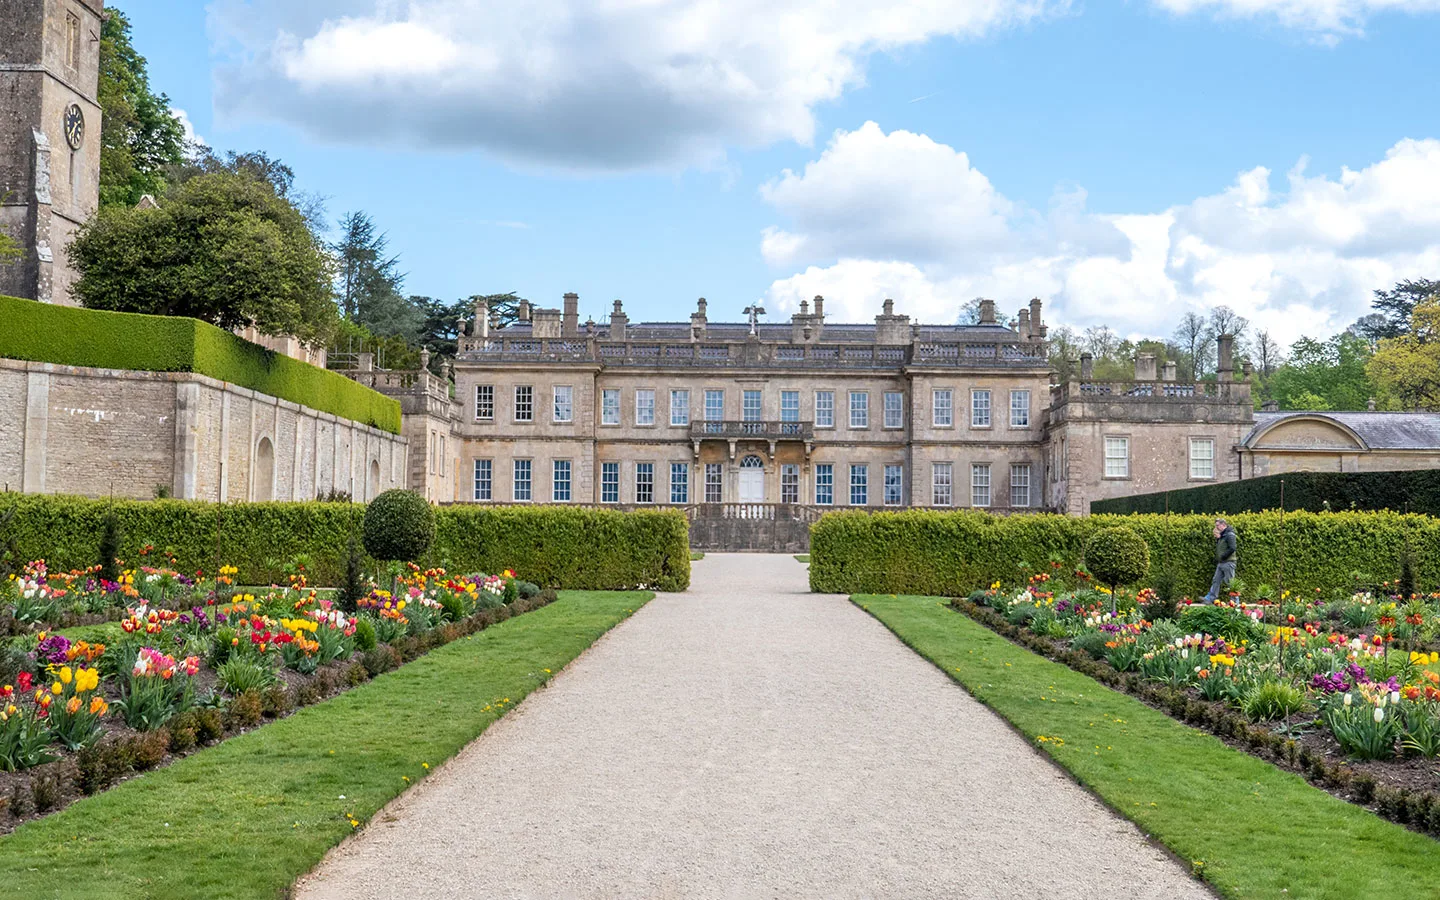 The house and gardens at Dyrham Park National Trust site